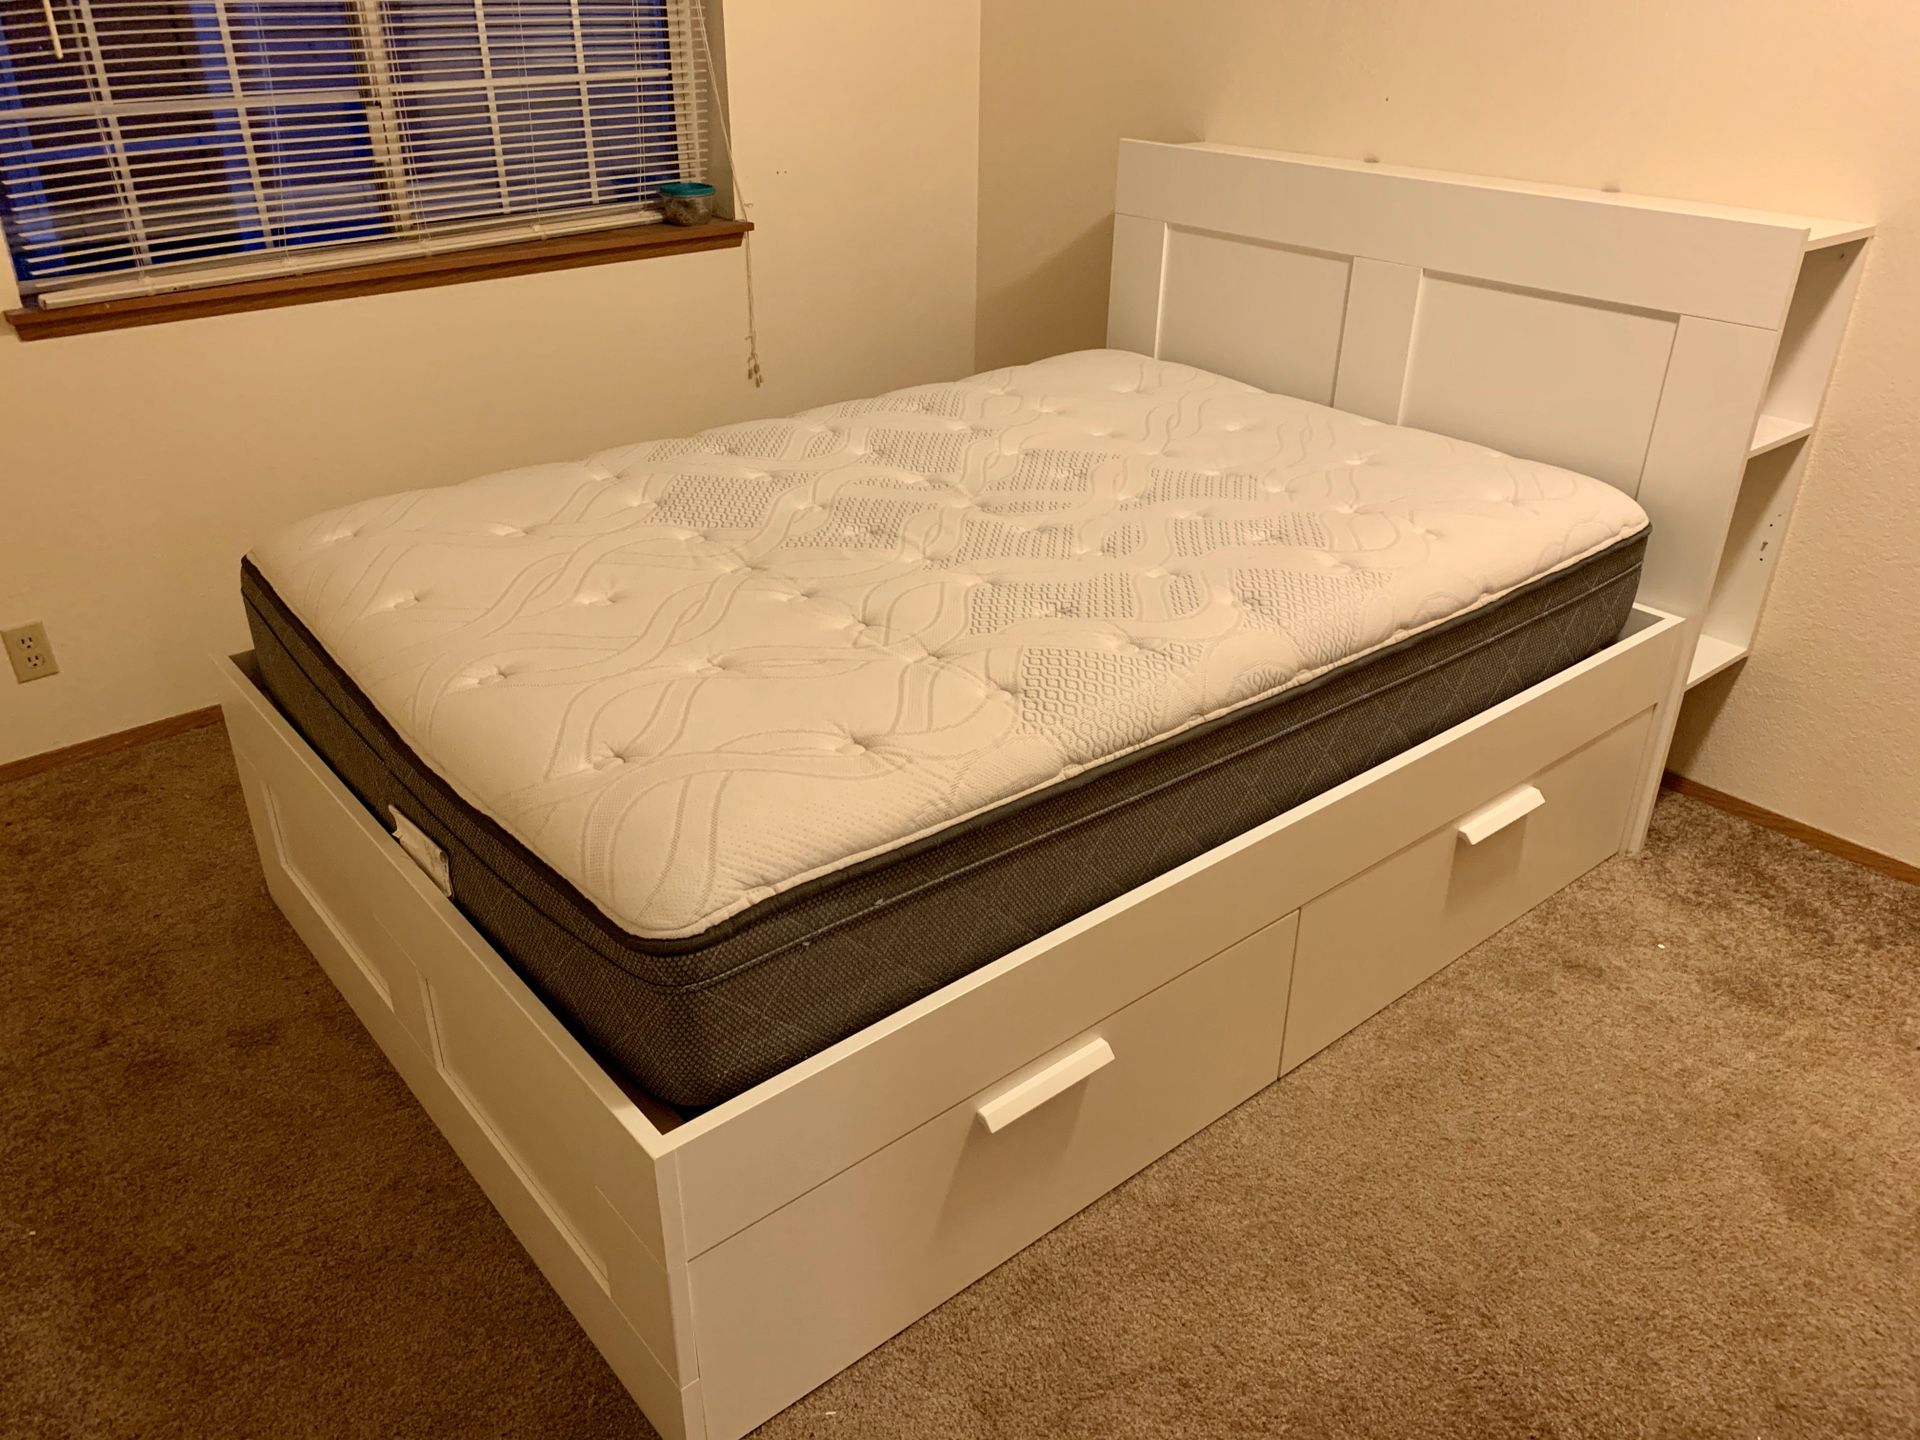 4 Month Old MALM IKEA Bed Frame and Headboard and Full Mattress